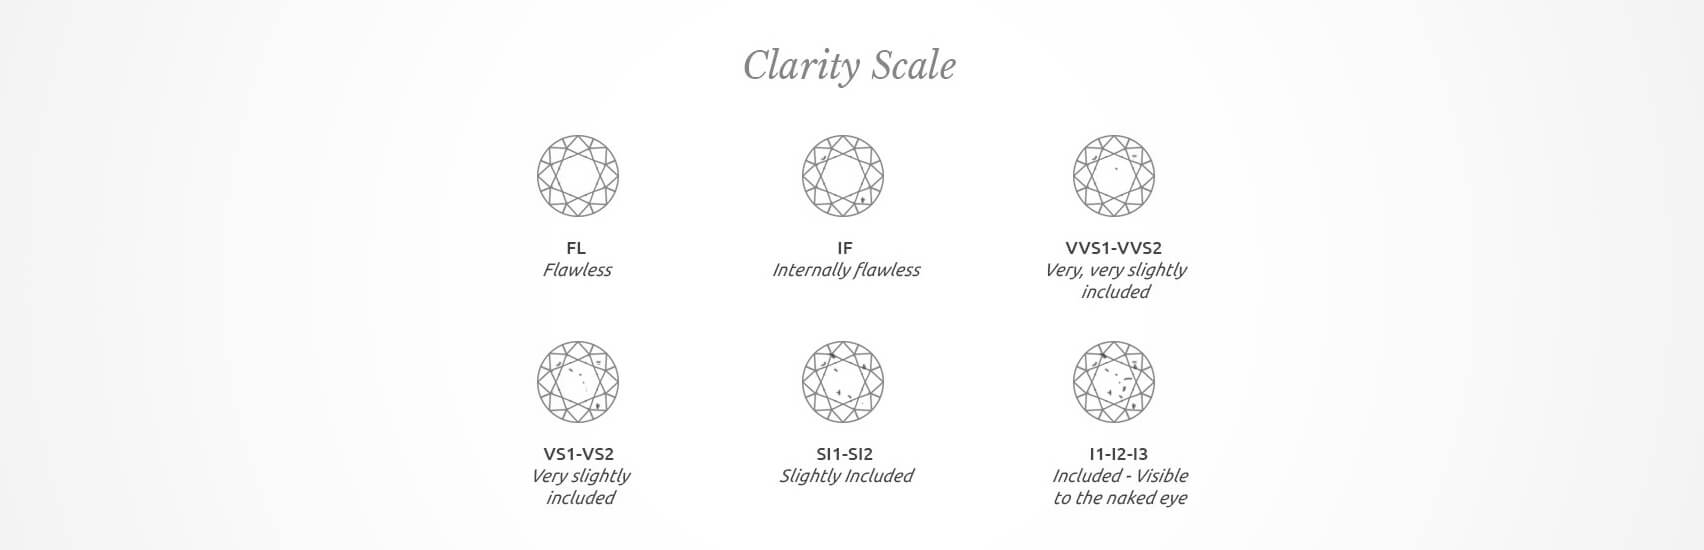 Clarity scale